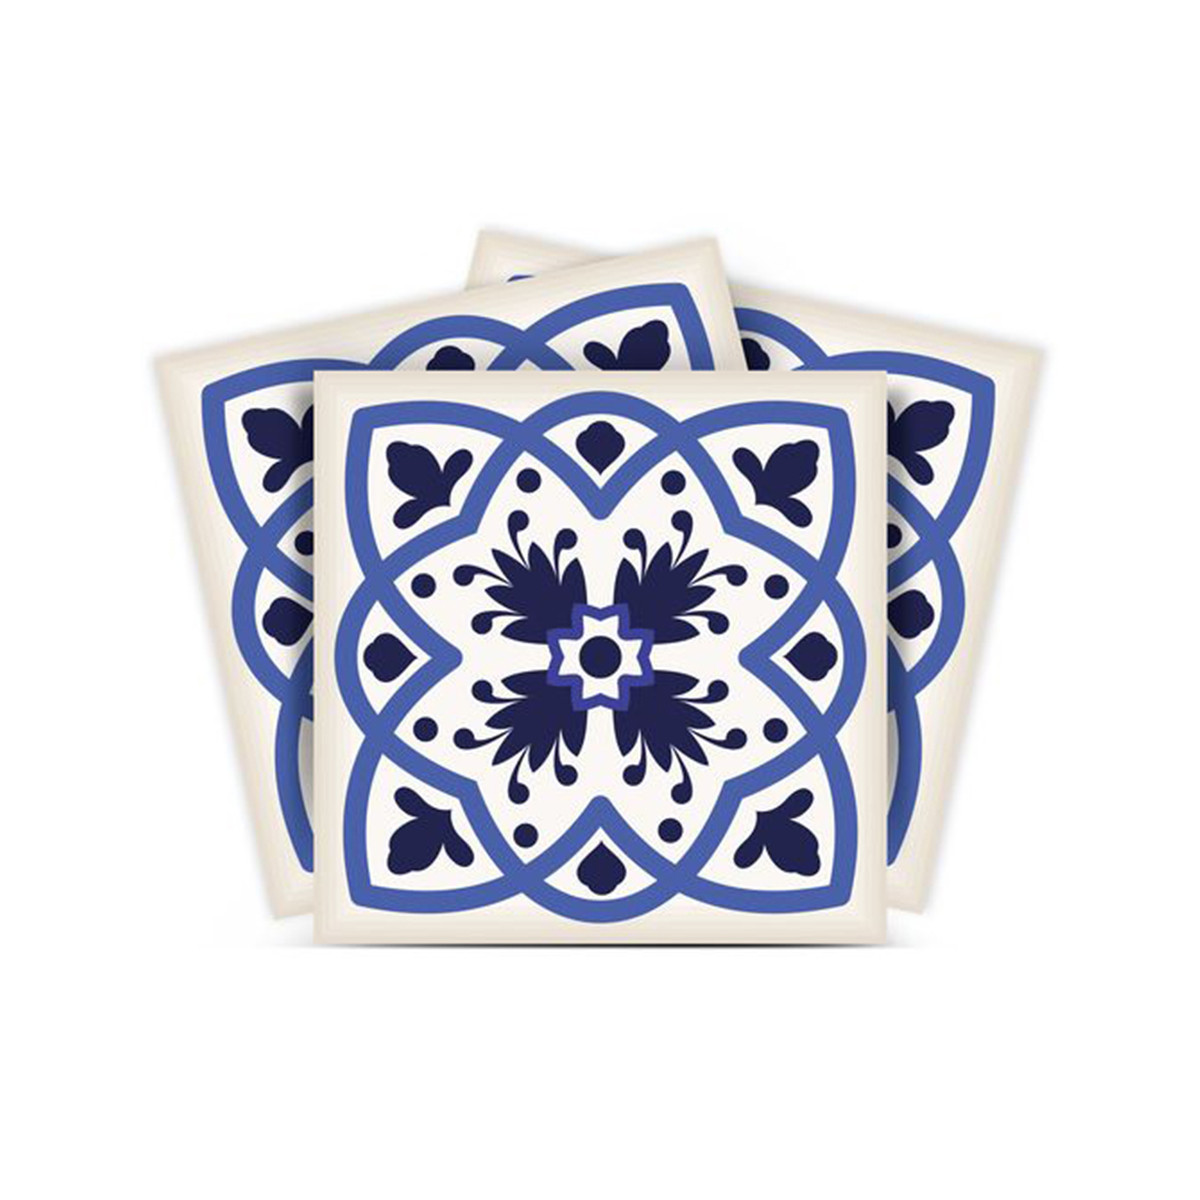 5" X 5" Blue And White Mosaic Peel And Stick Removable Tiles-399826-1